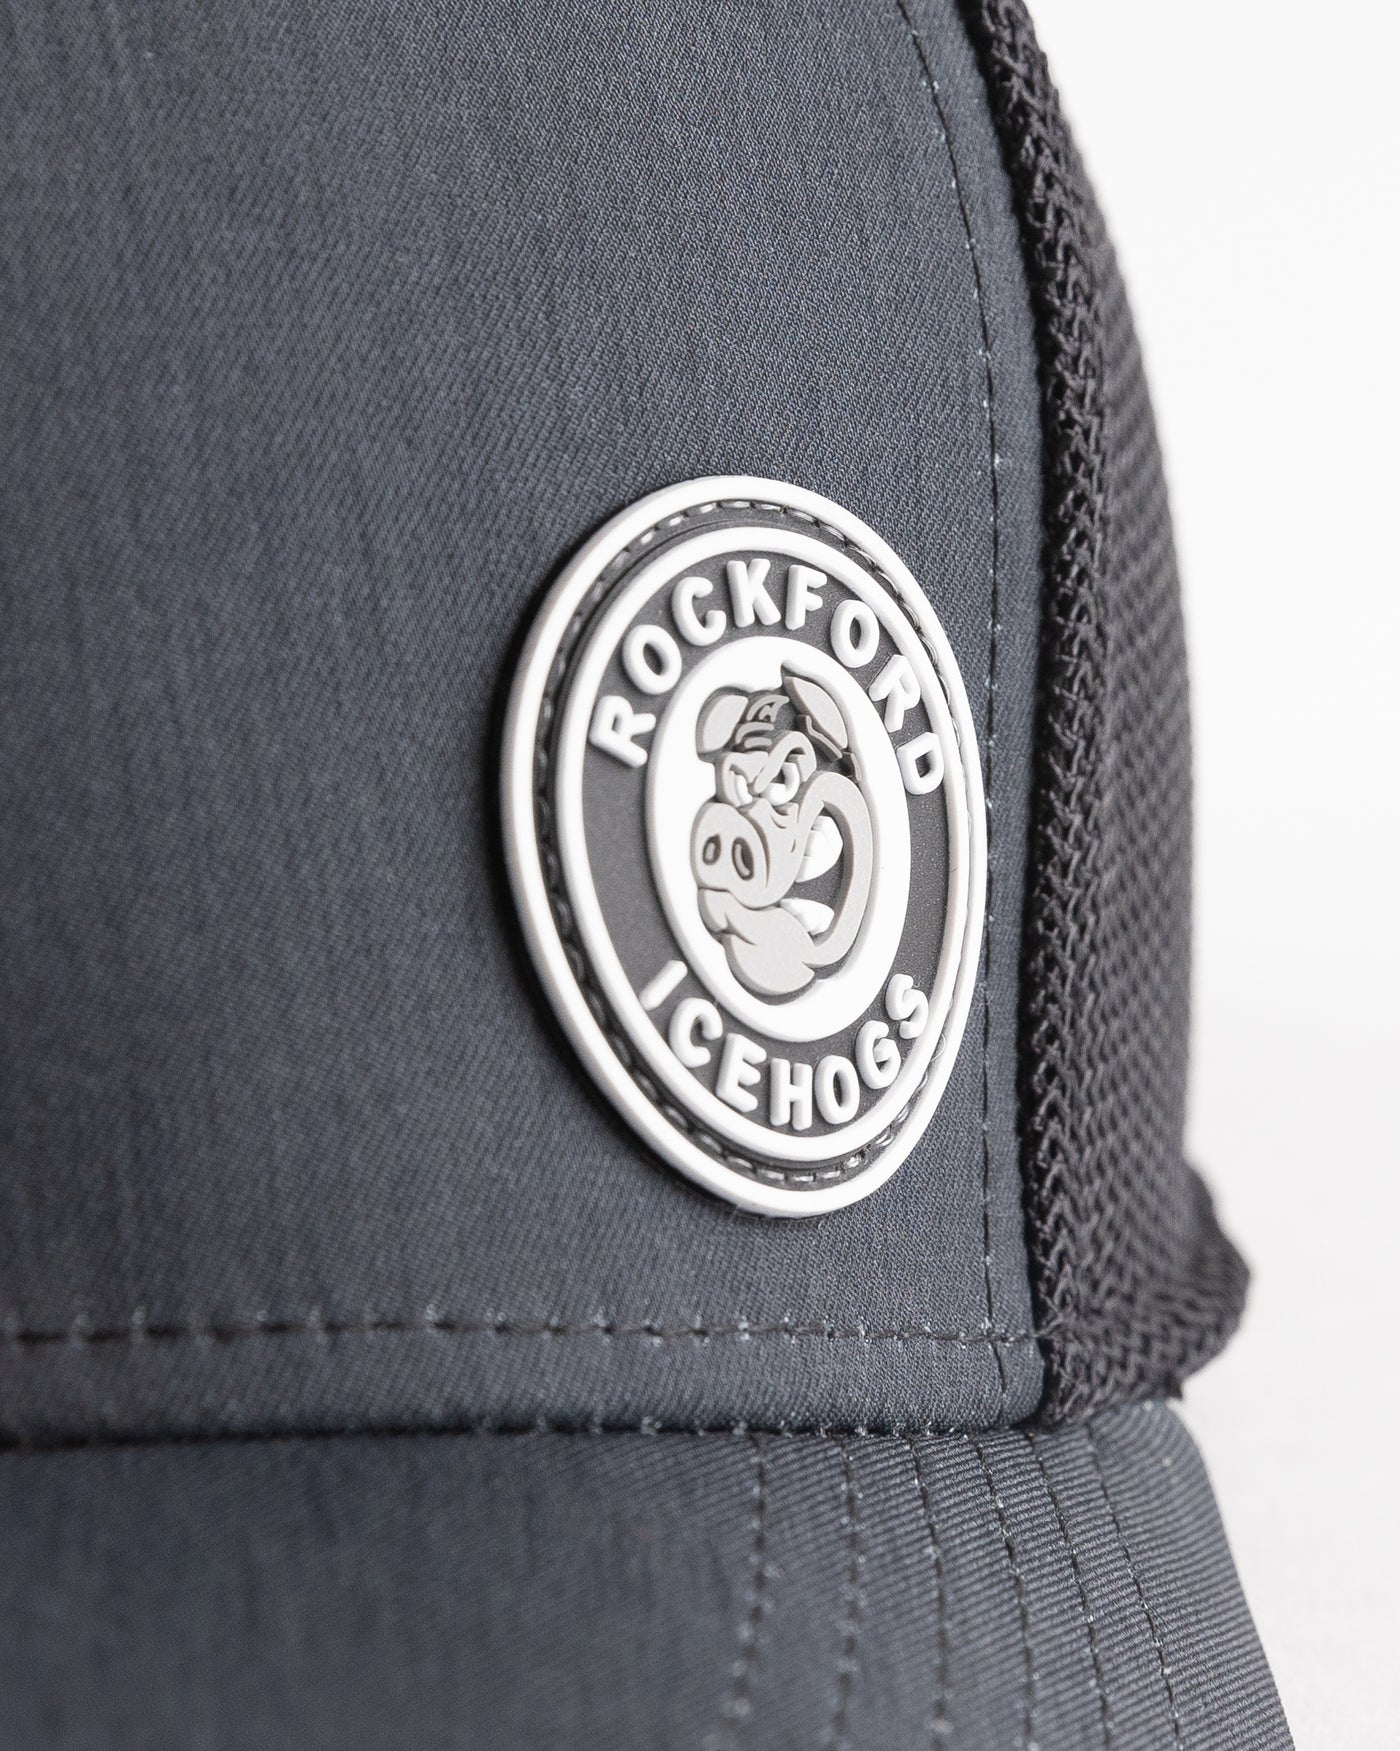 black trucker with Rockford IceHogs rubber patch on front - detail lay flat